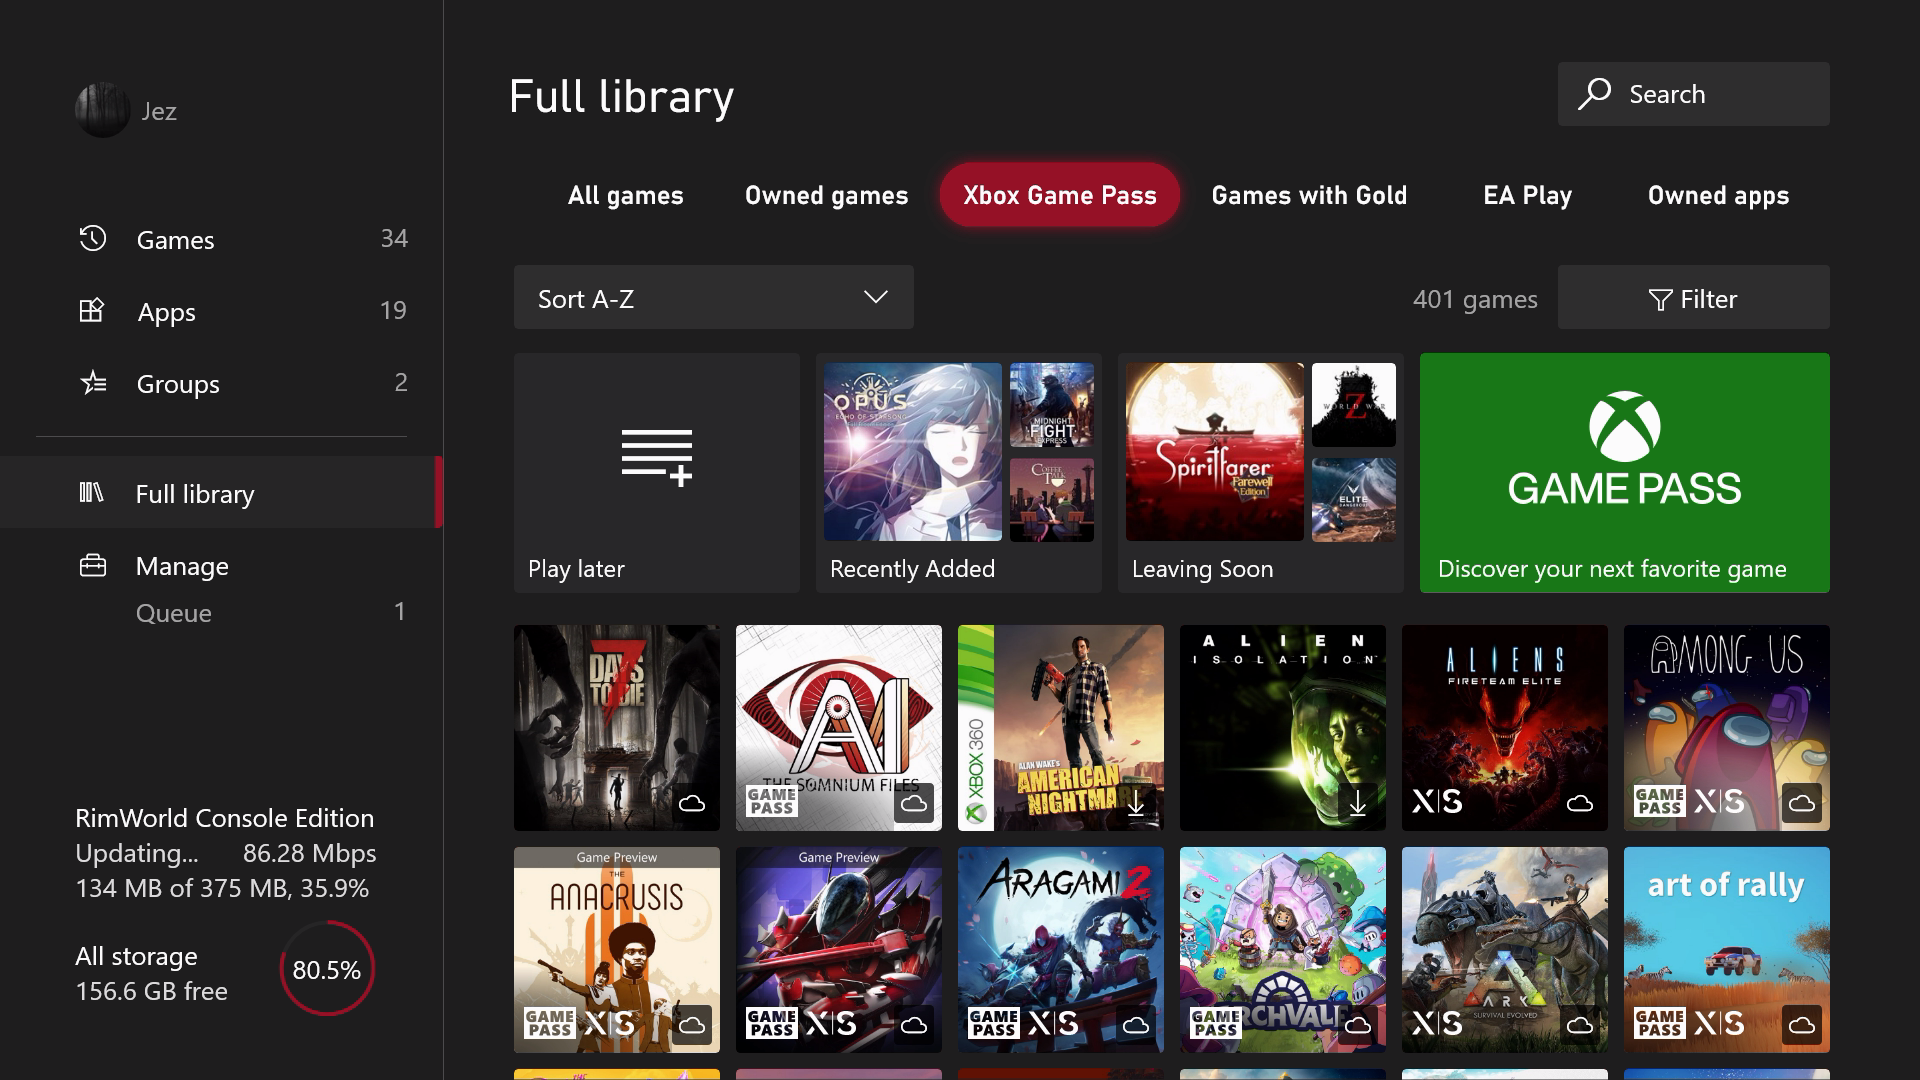 Xbox Full Games & Apps library, redesigned as of August 2022